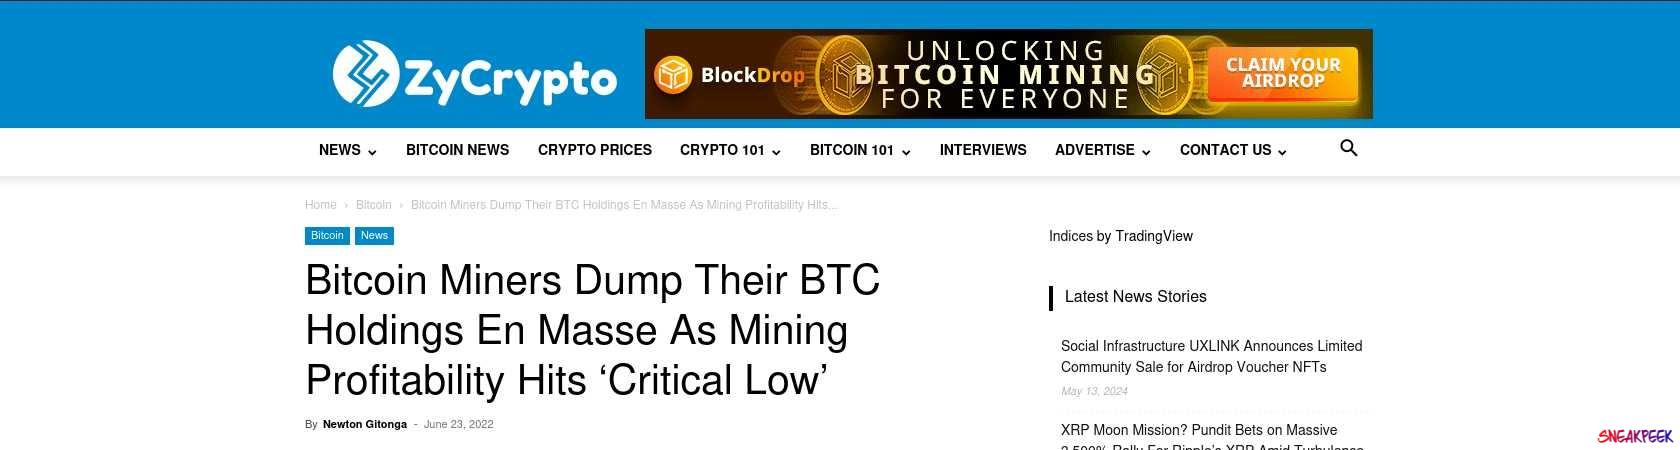 Read the full Article:  ⭲ Bitcoin Miners Dump Their BTC Holdings En Masse As Mining Profitability Hits ‘Critical Low’